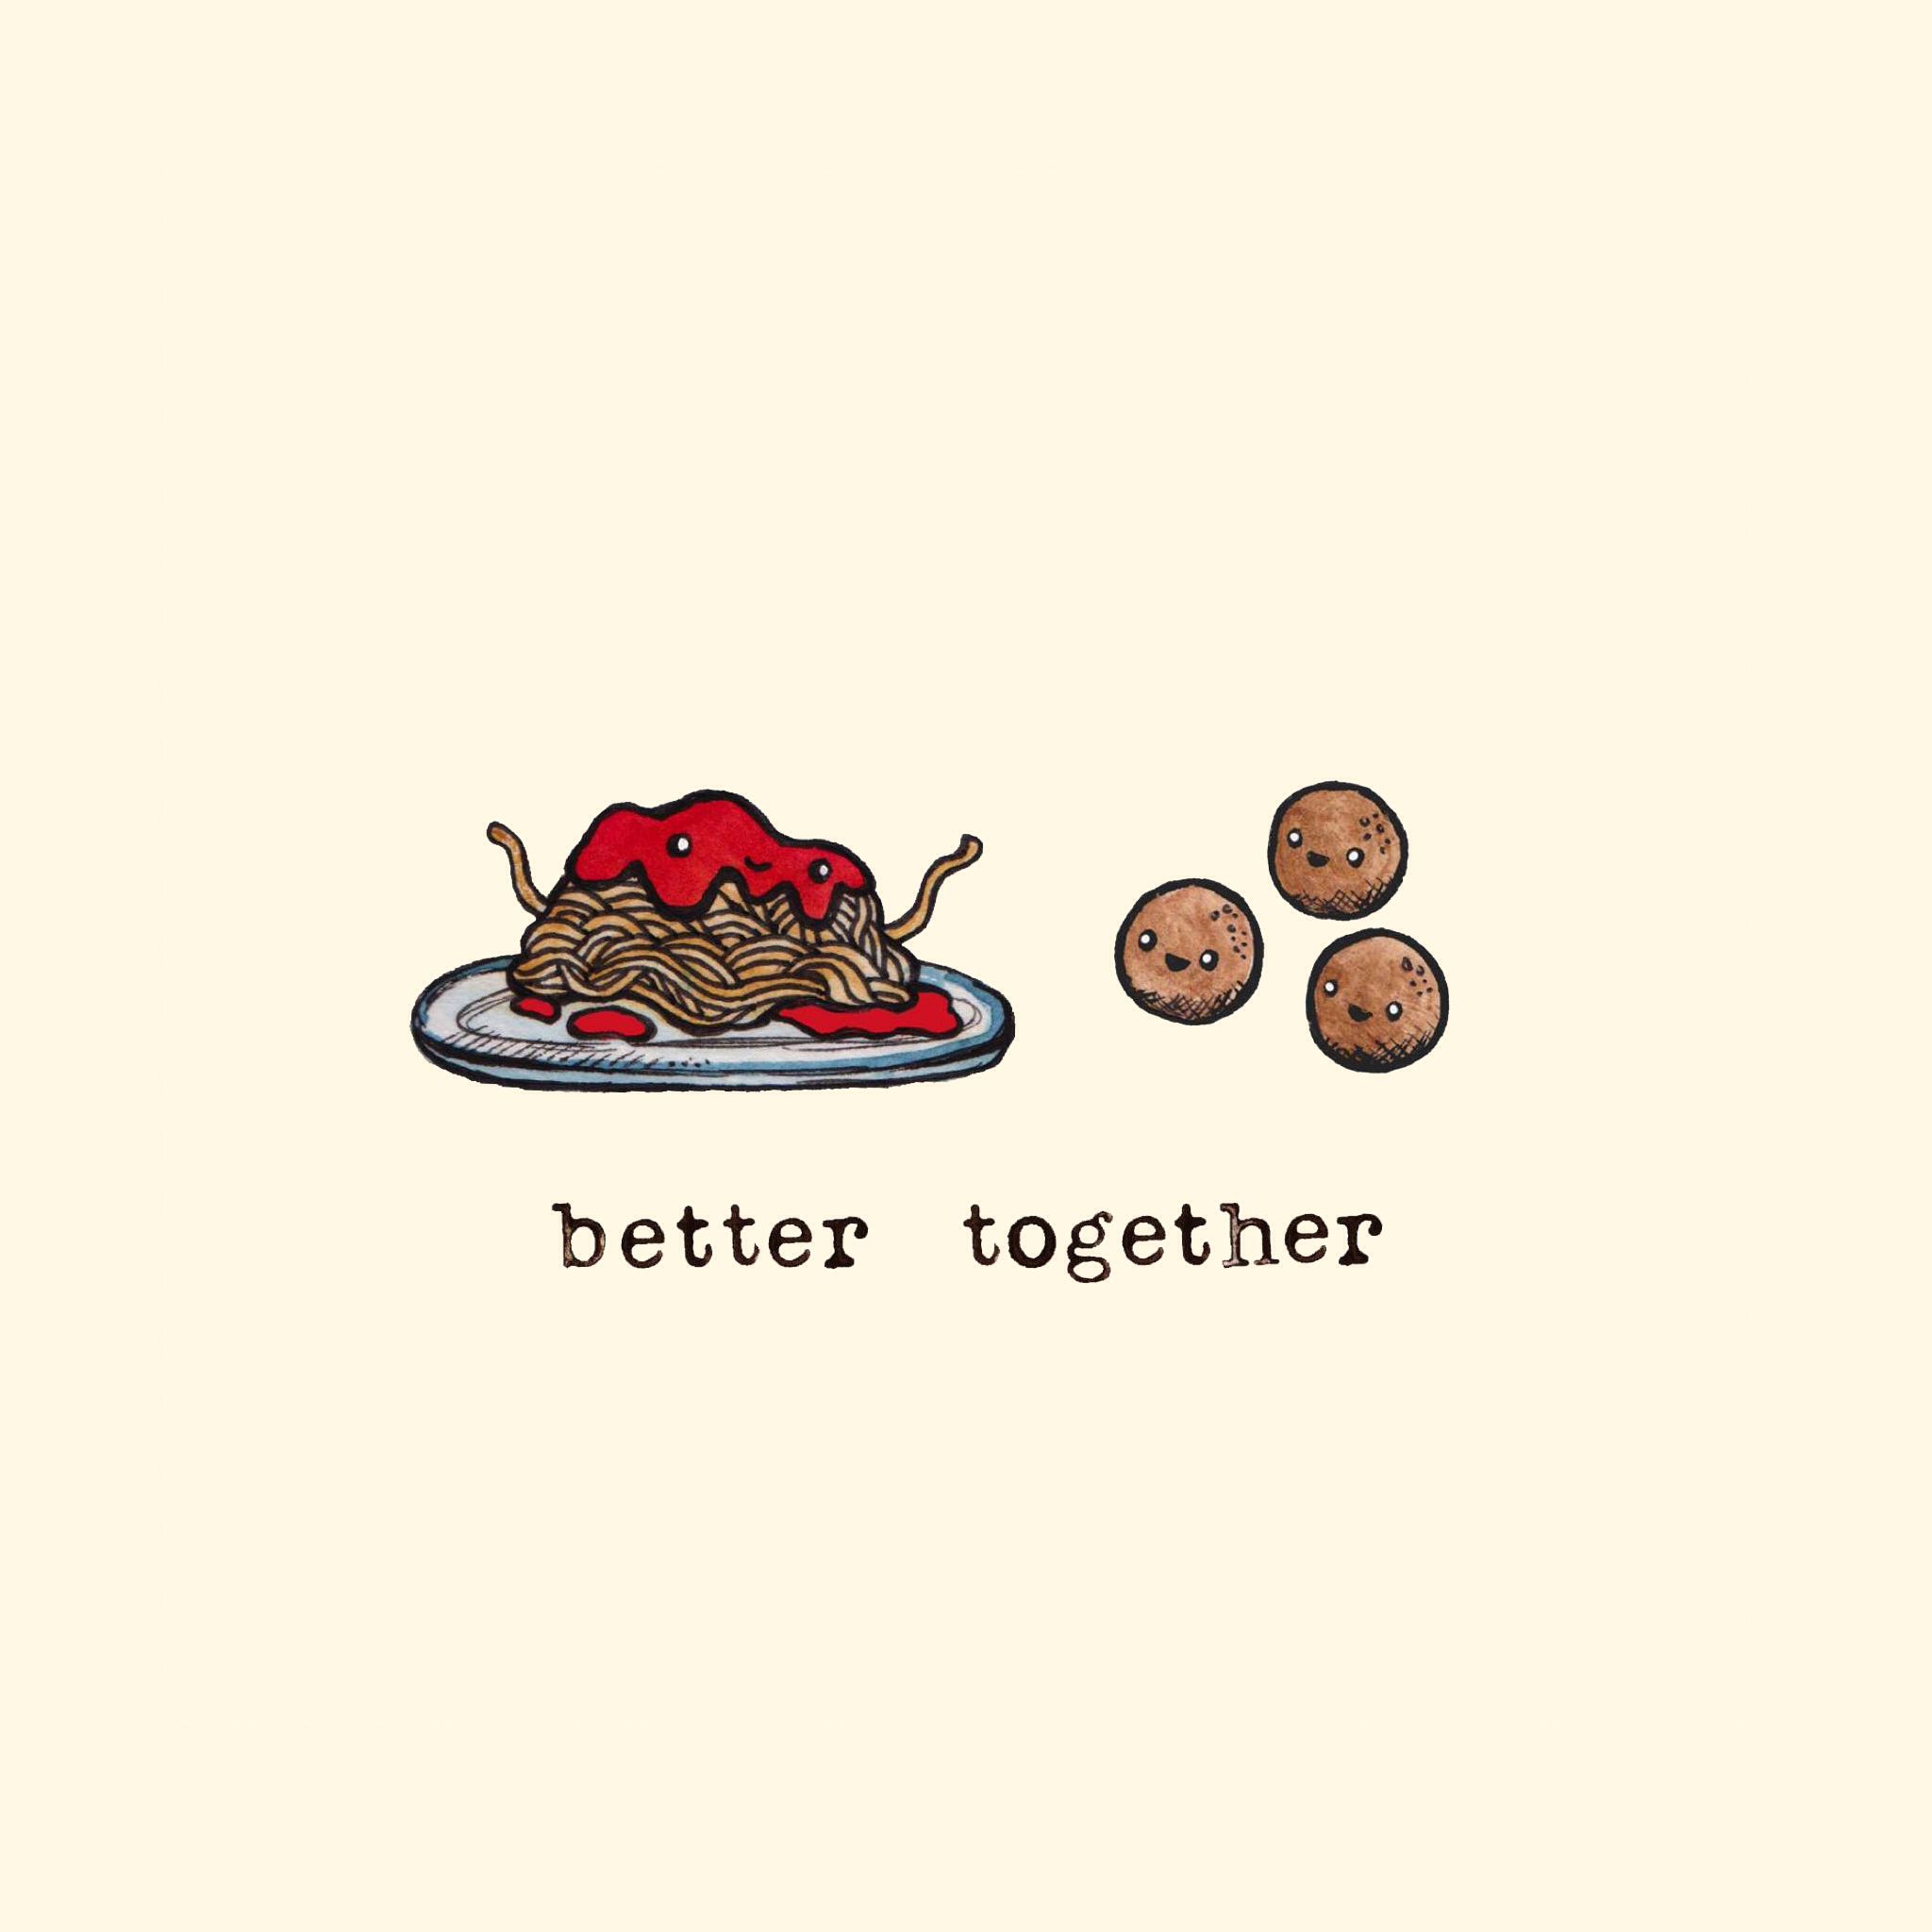 A drawing of pasta with the words better together - Food